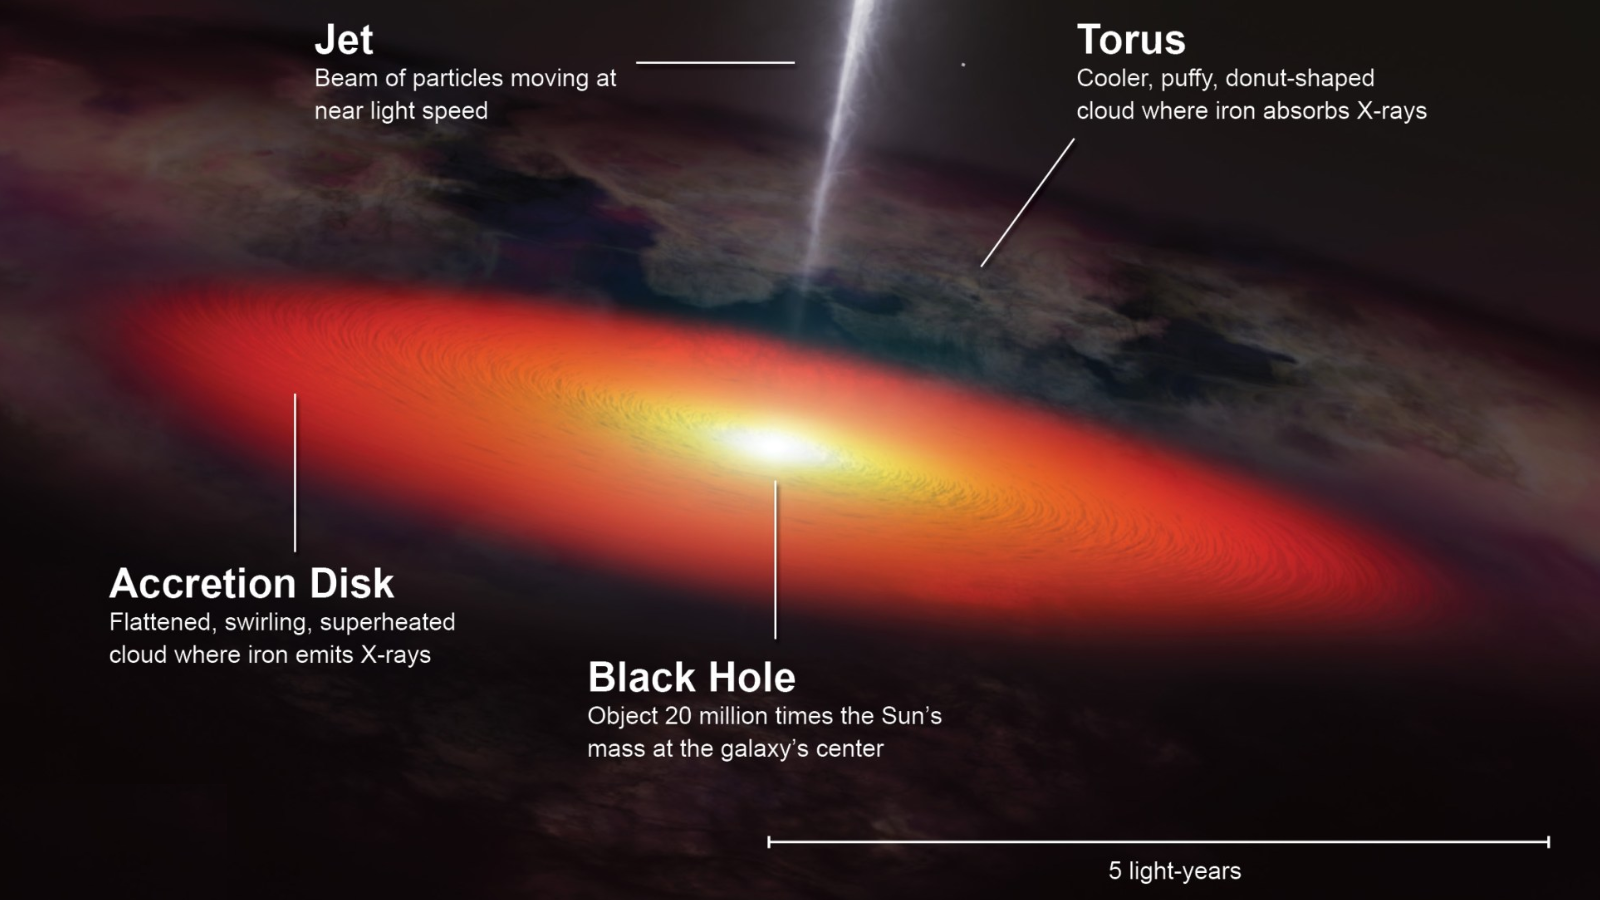 An illustration showing the anatomy of the supermassive black hole and AGN at the heart of NGC 4151.